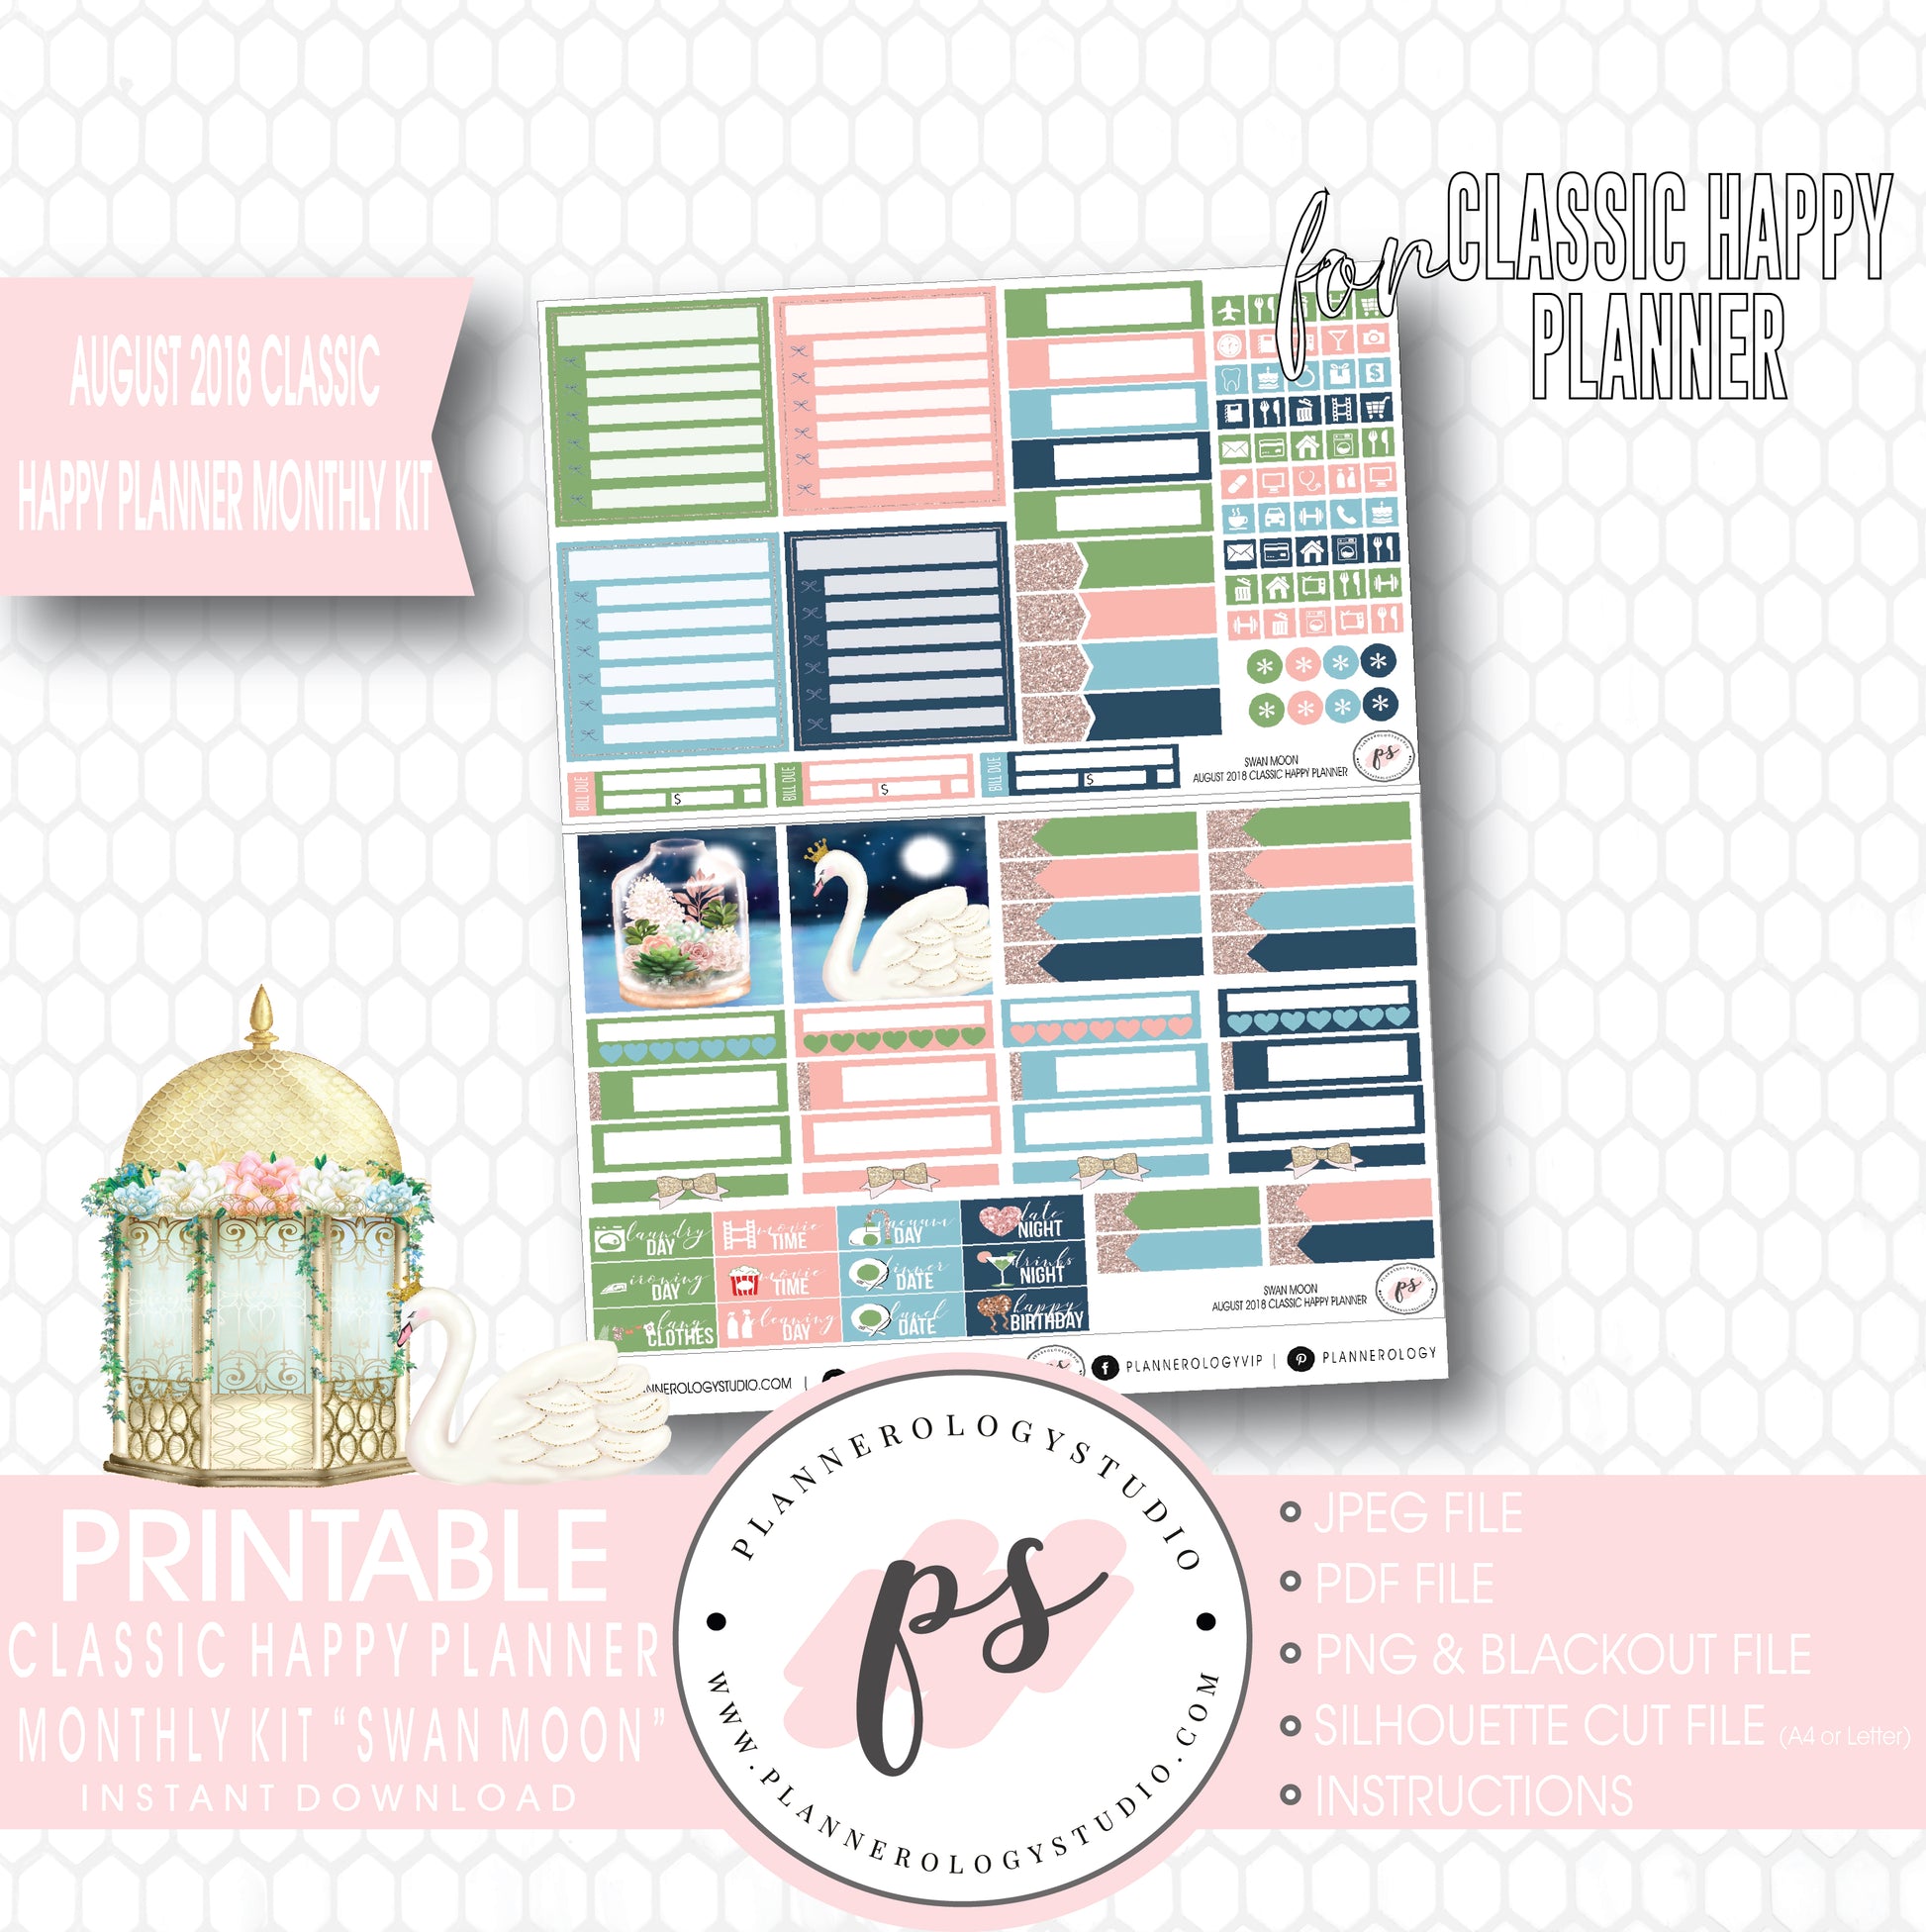 Swan Moon August 2018 Monthly View Kit Digital Printable Planner Stickers (for use with Classic Happy Planner) - Plannerologystudio